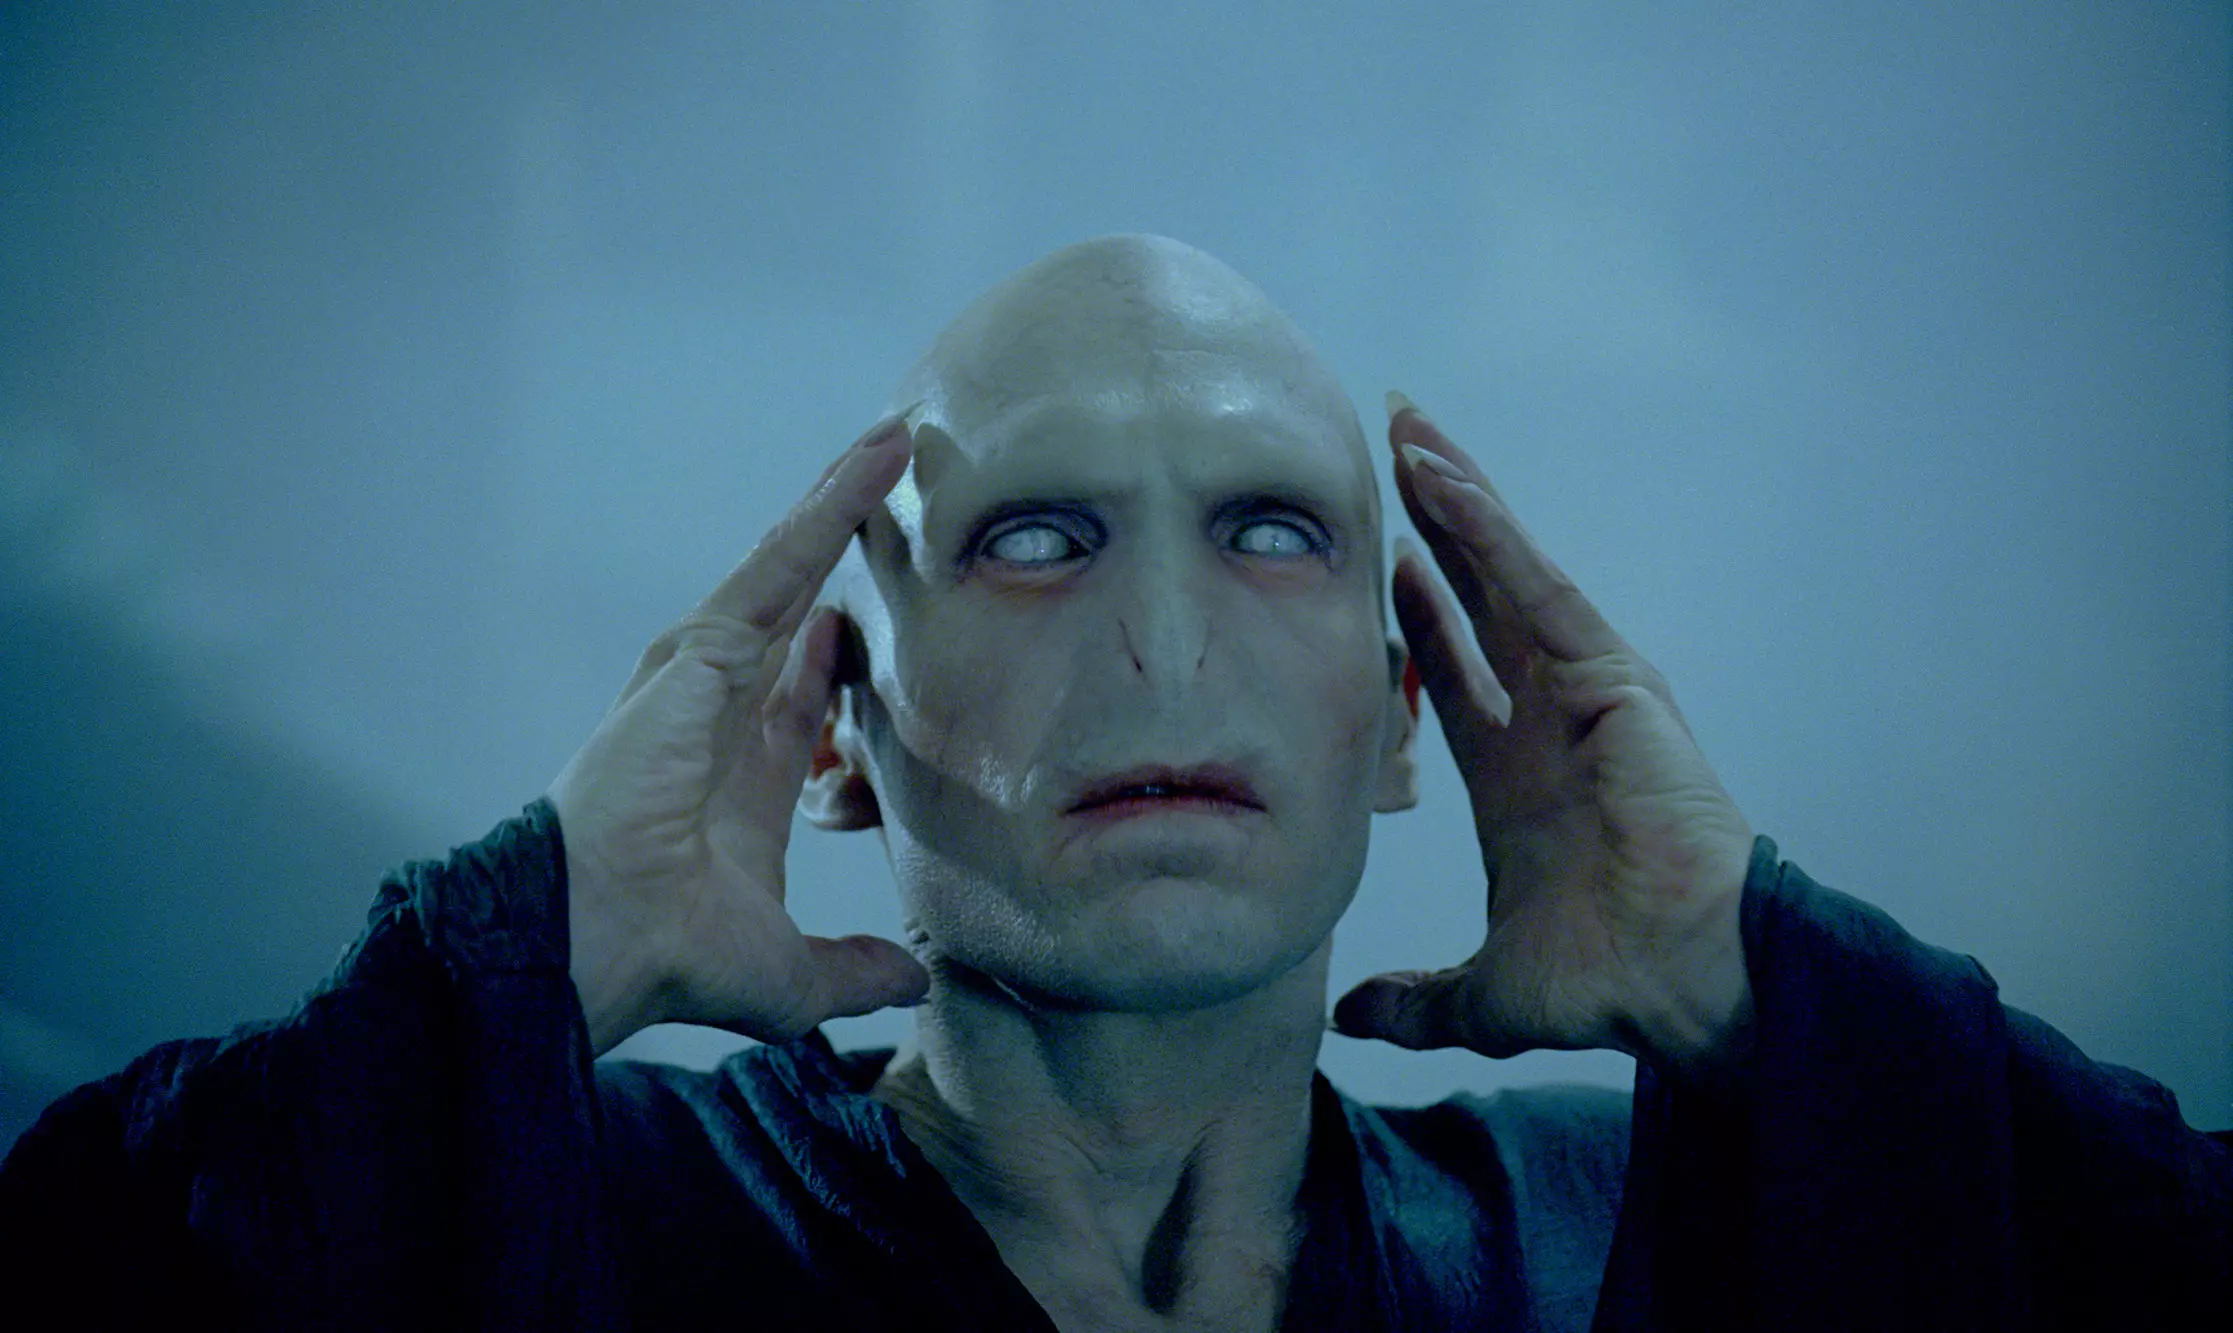 Cheer up, Voldy, they're sorting it.